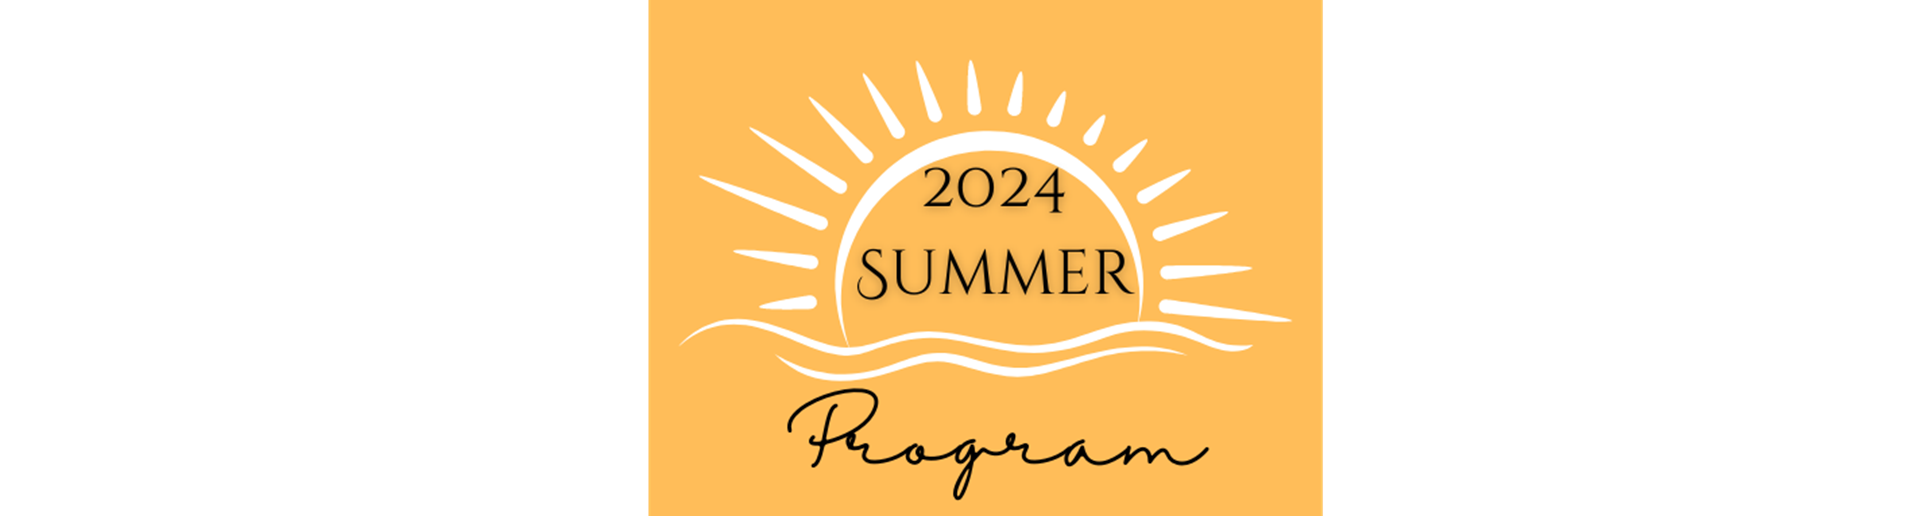 Check Out the 2024 Summer Program